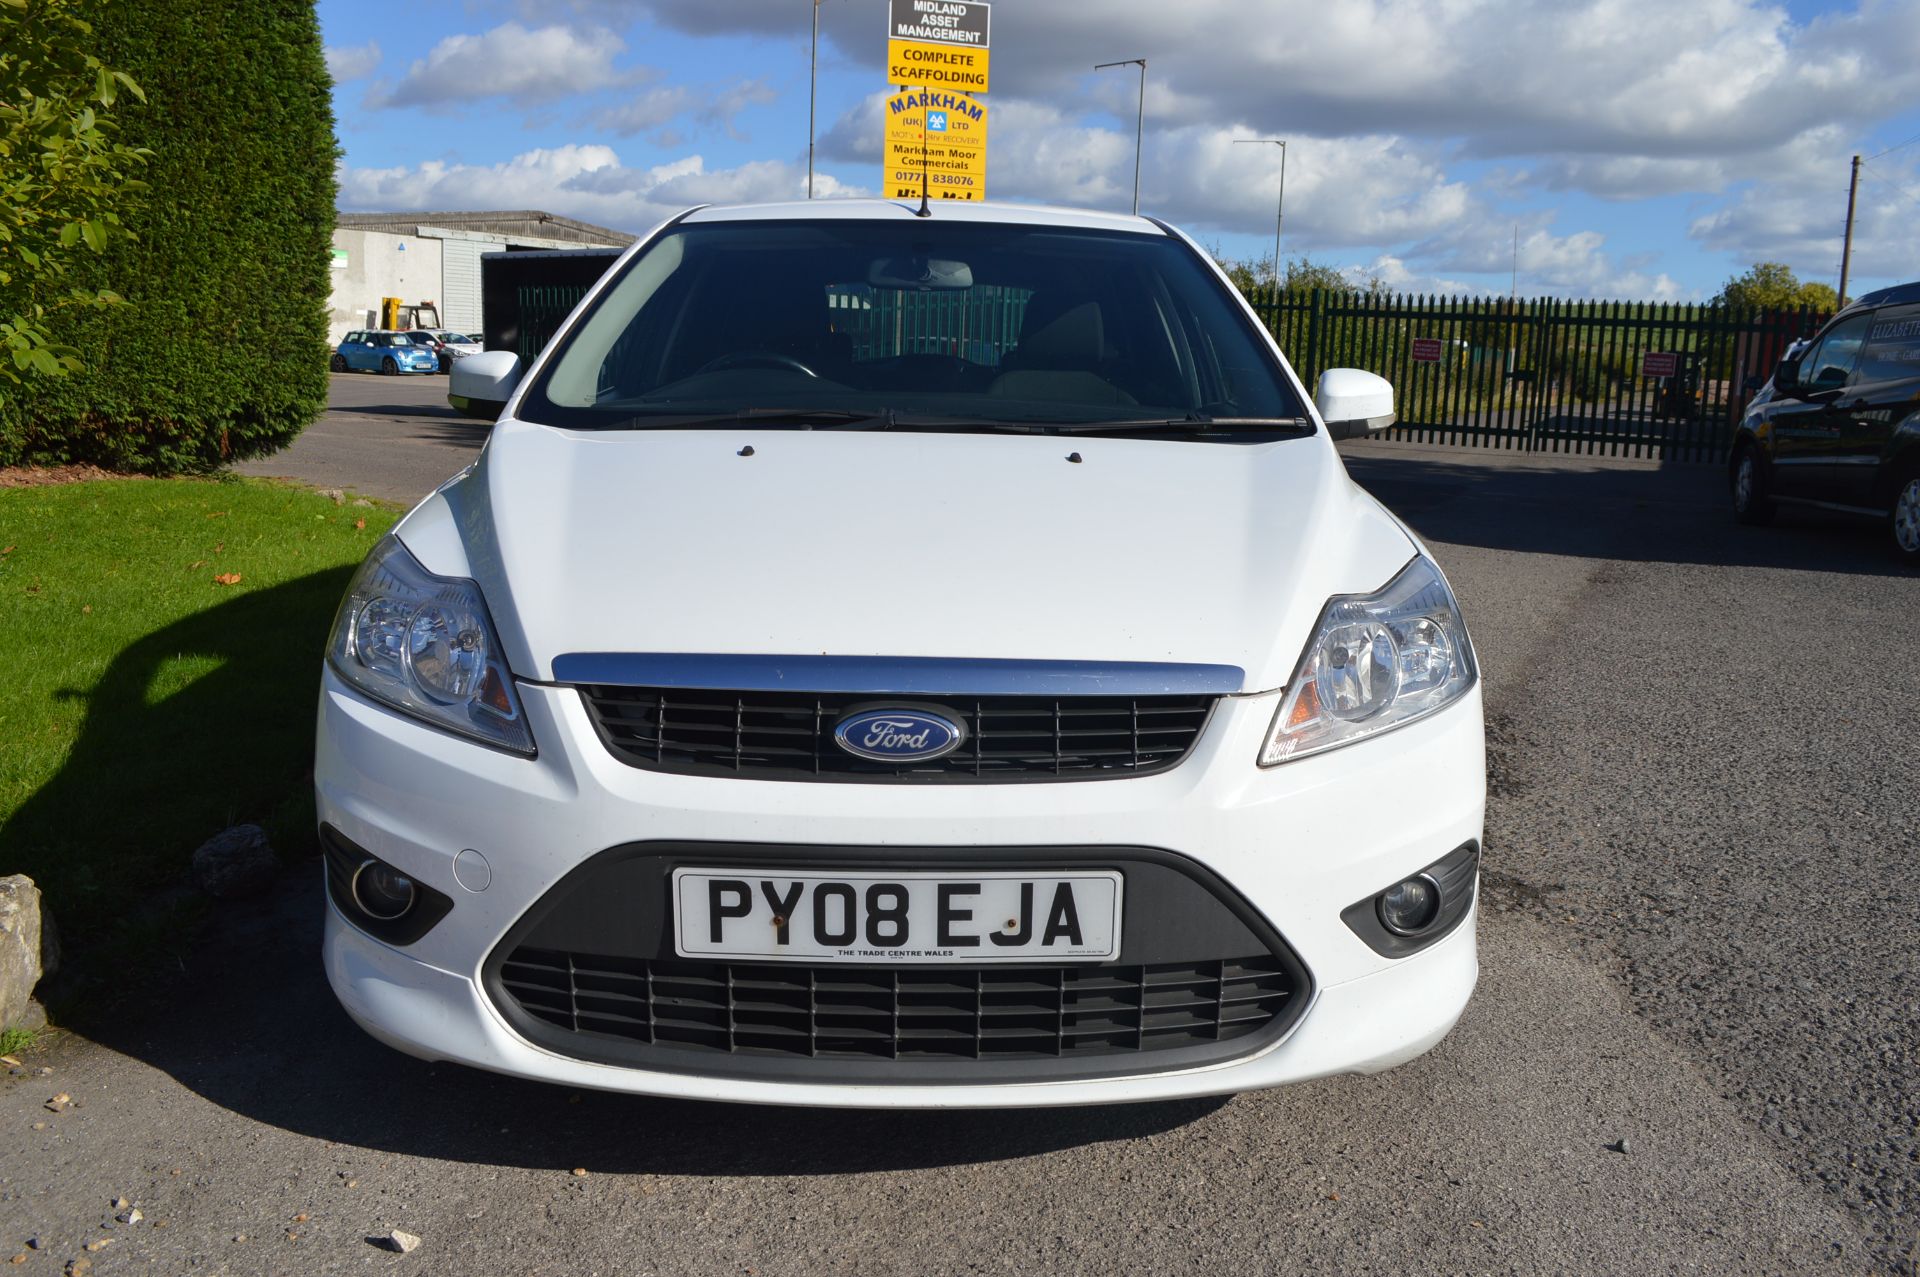 2008/08 REG FORD FOCUS ECONETIC TURBO DIESEL 109, TURBO ISSUE, SHOWING 2 FORMER KEEPERS *NO VAT* - Image 2 of 18